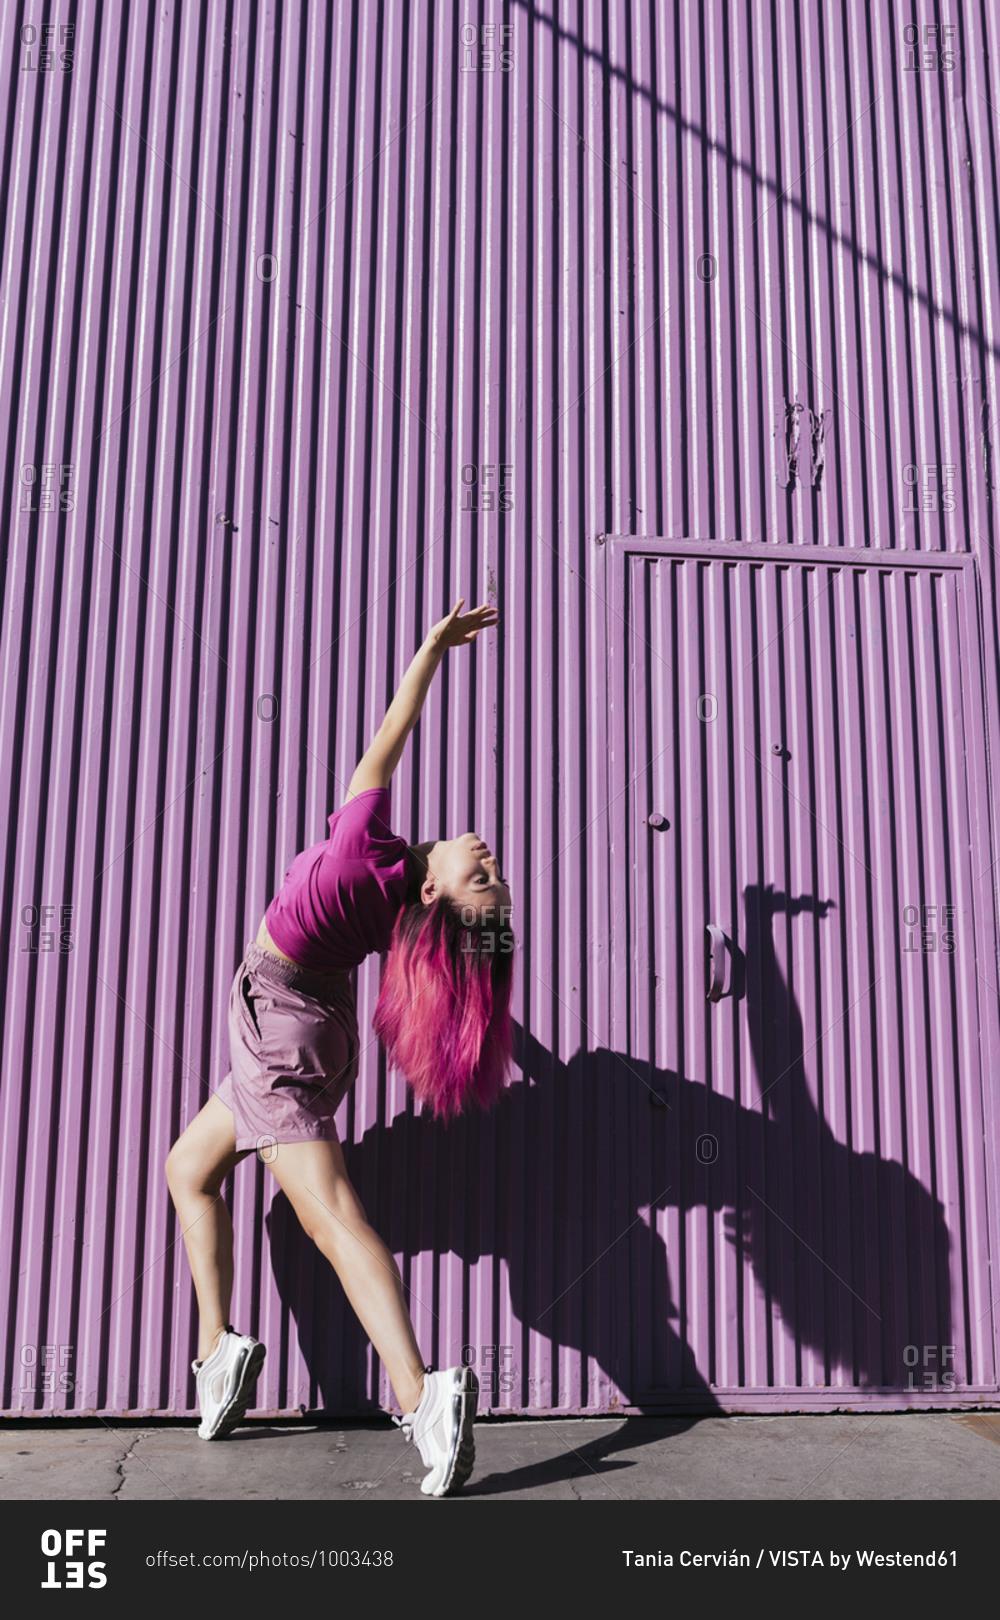 Young woman with dyed red hair dancing in front of purple wall in the city